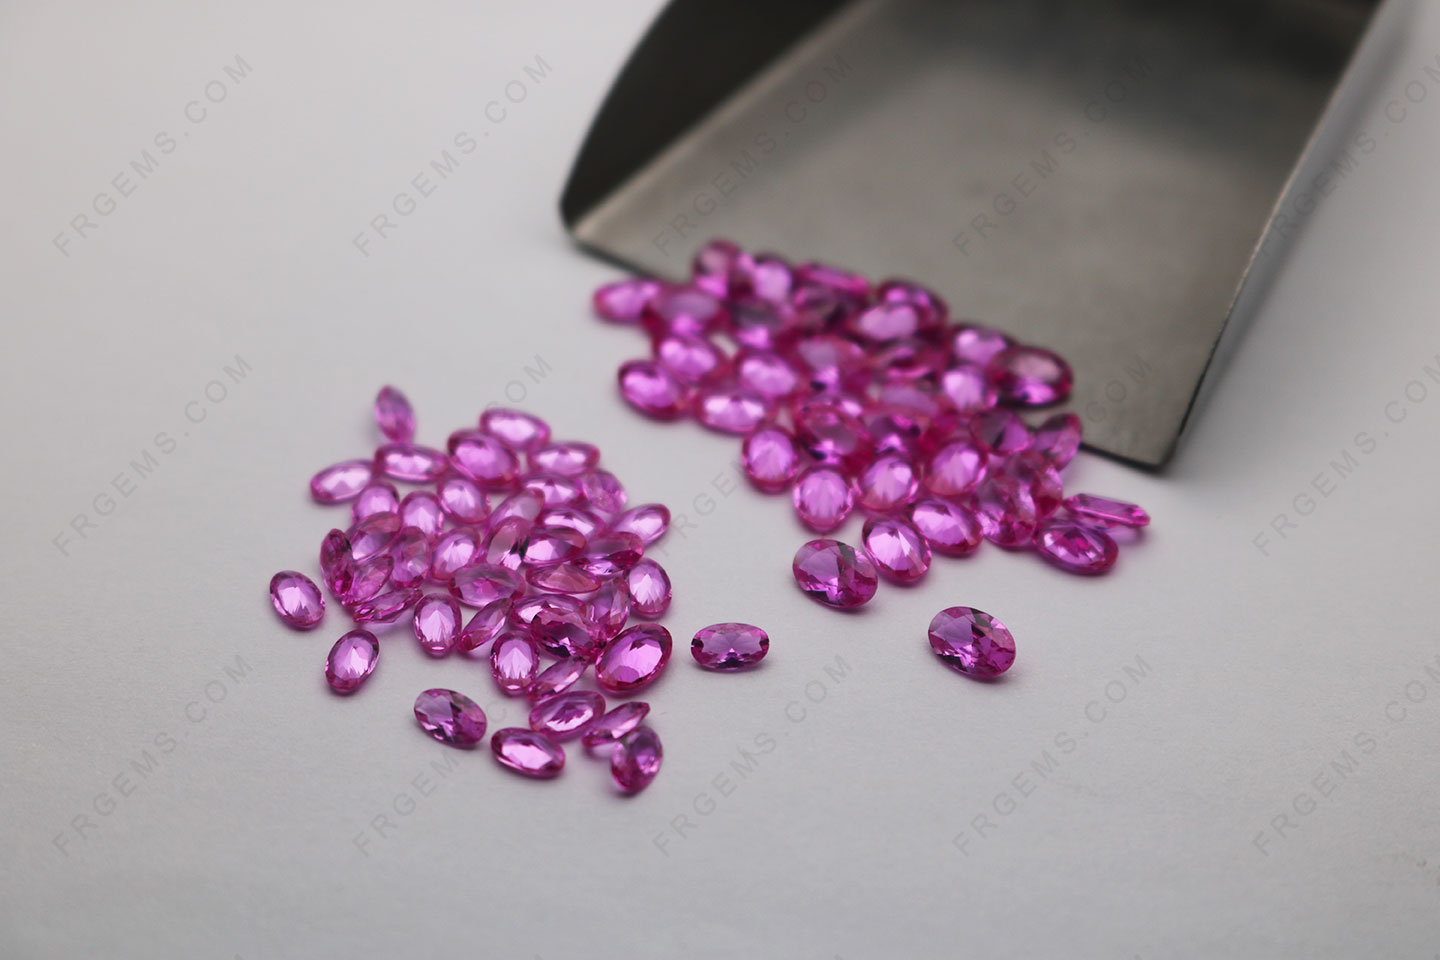 Synthetic Corundum Rose Pink Sapphire #3 color Oval Shape faceted Cut 4x6mm Gemstones